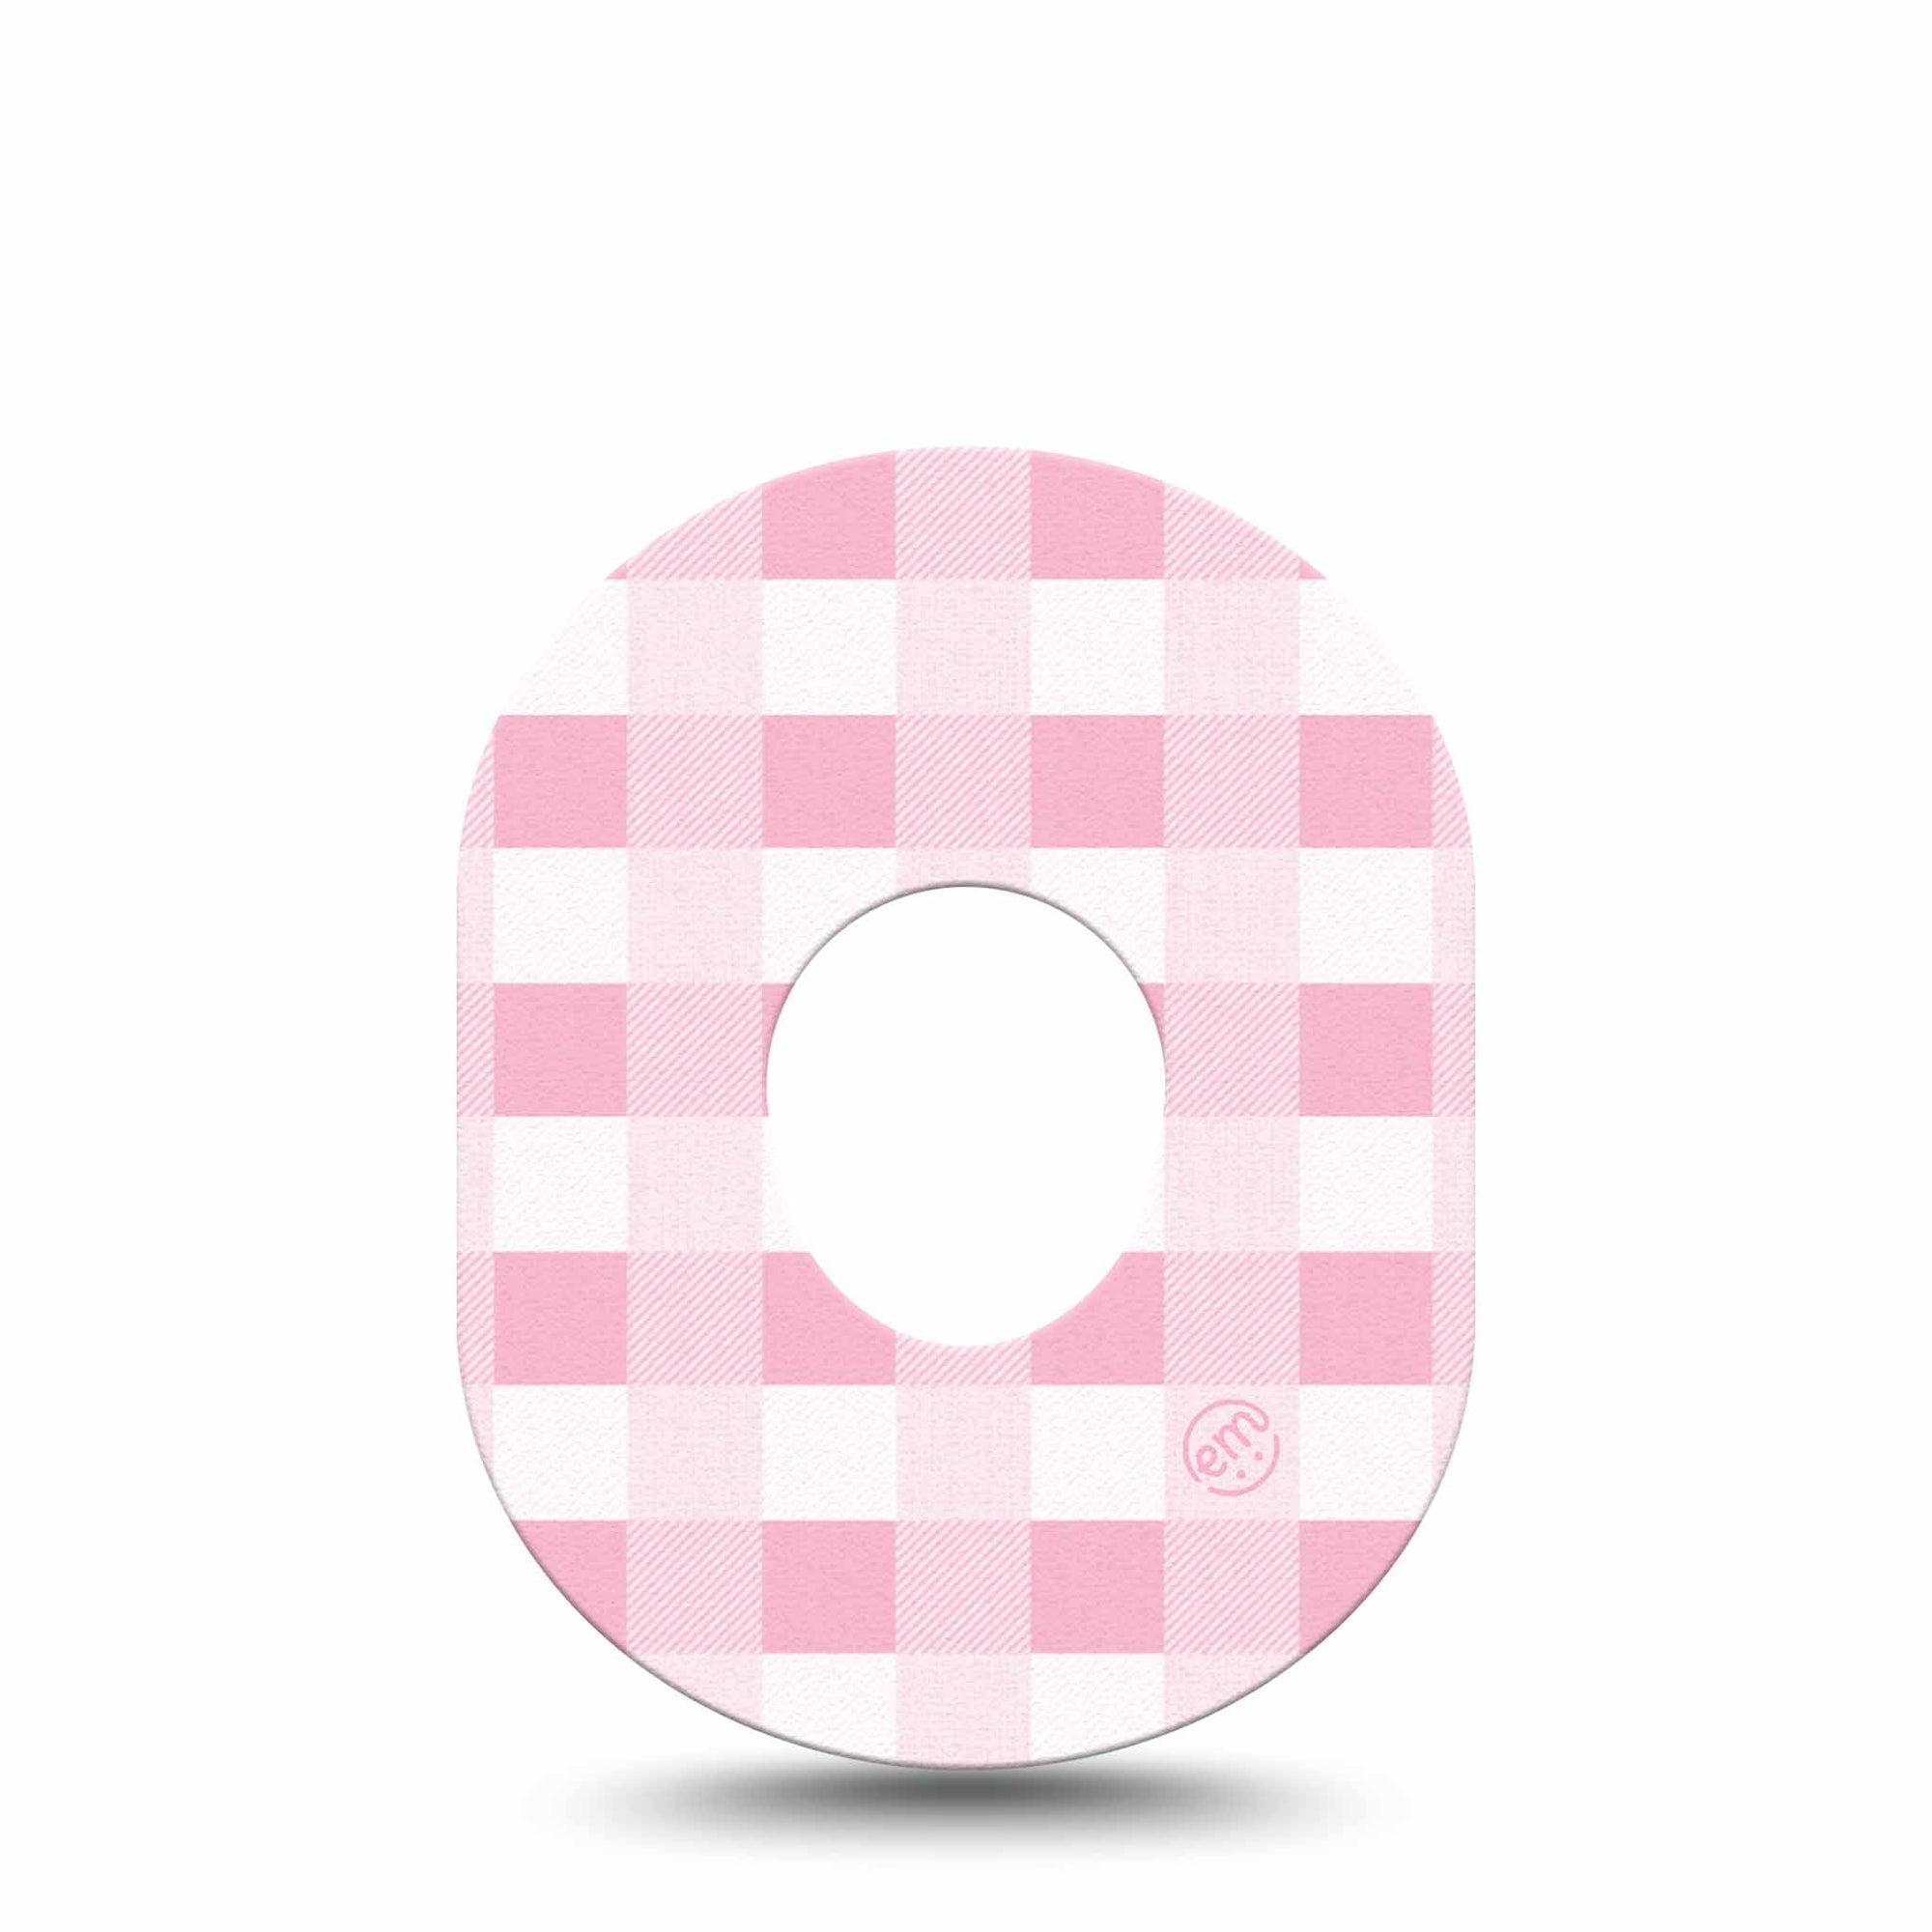 ExpressionMed Pink Gingham Dexcom G7 Tape, Single, Pink Plaid Inspired, Adhesive Patch Design